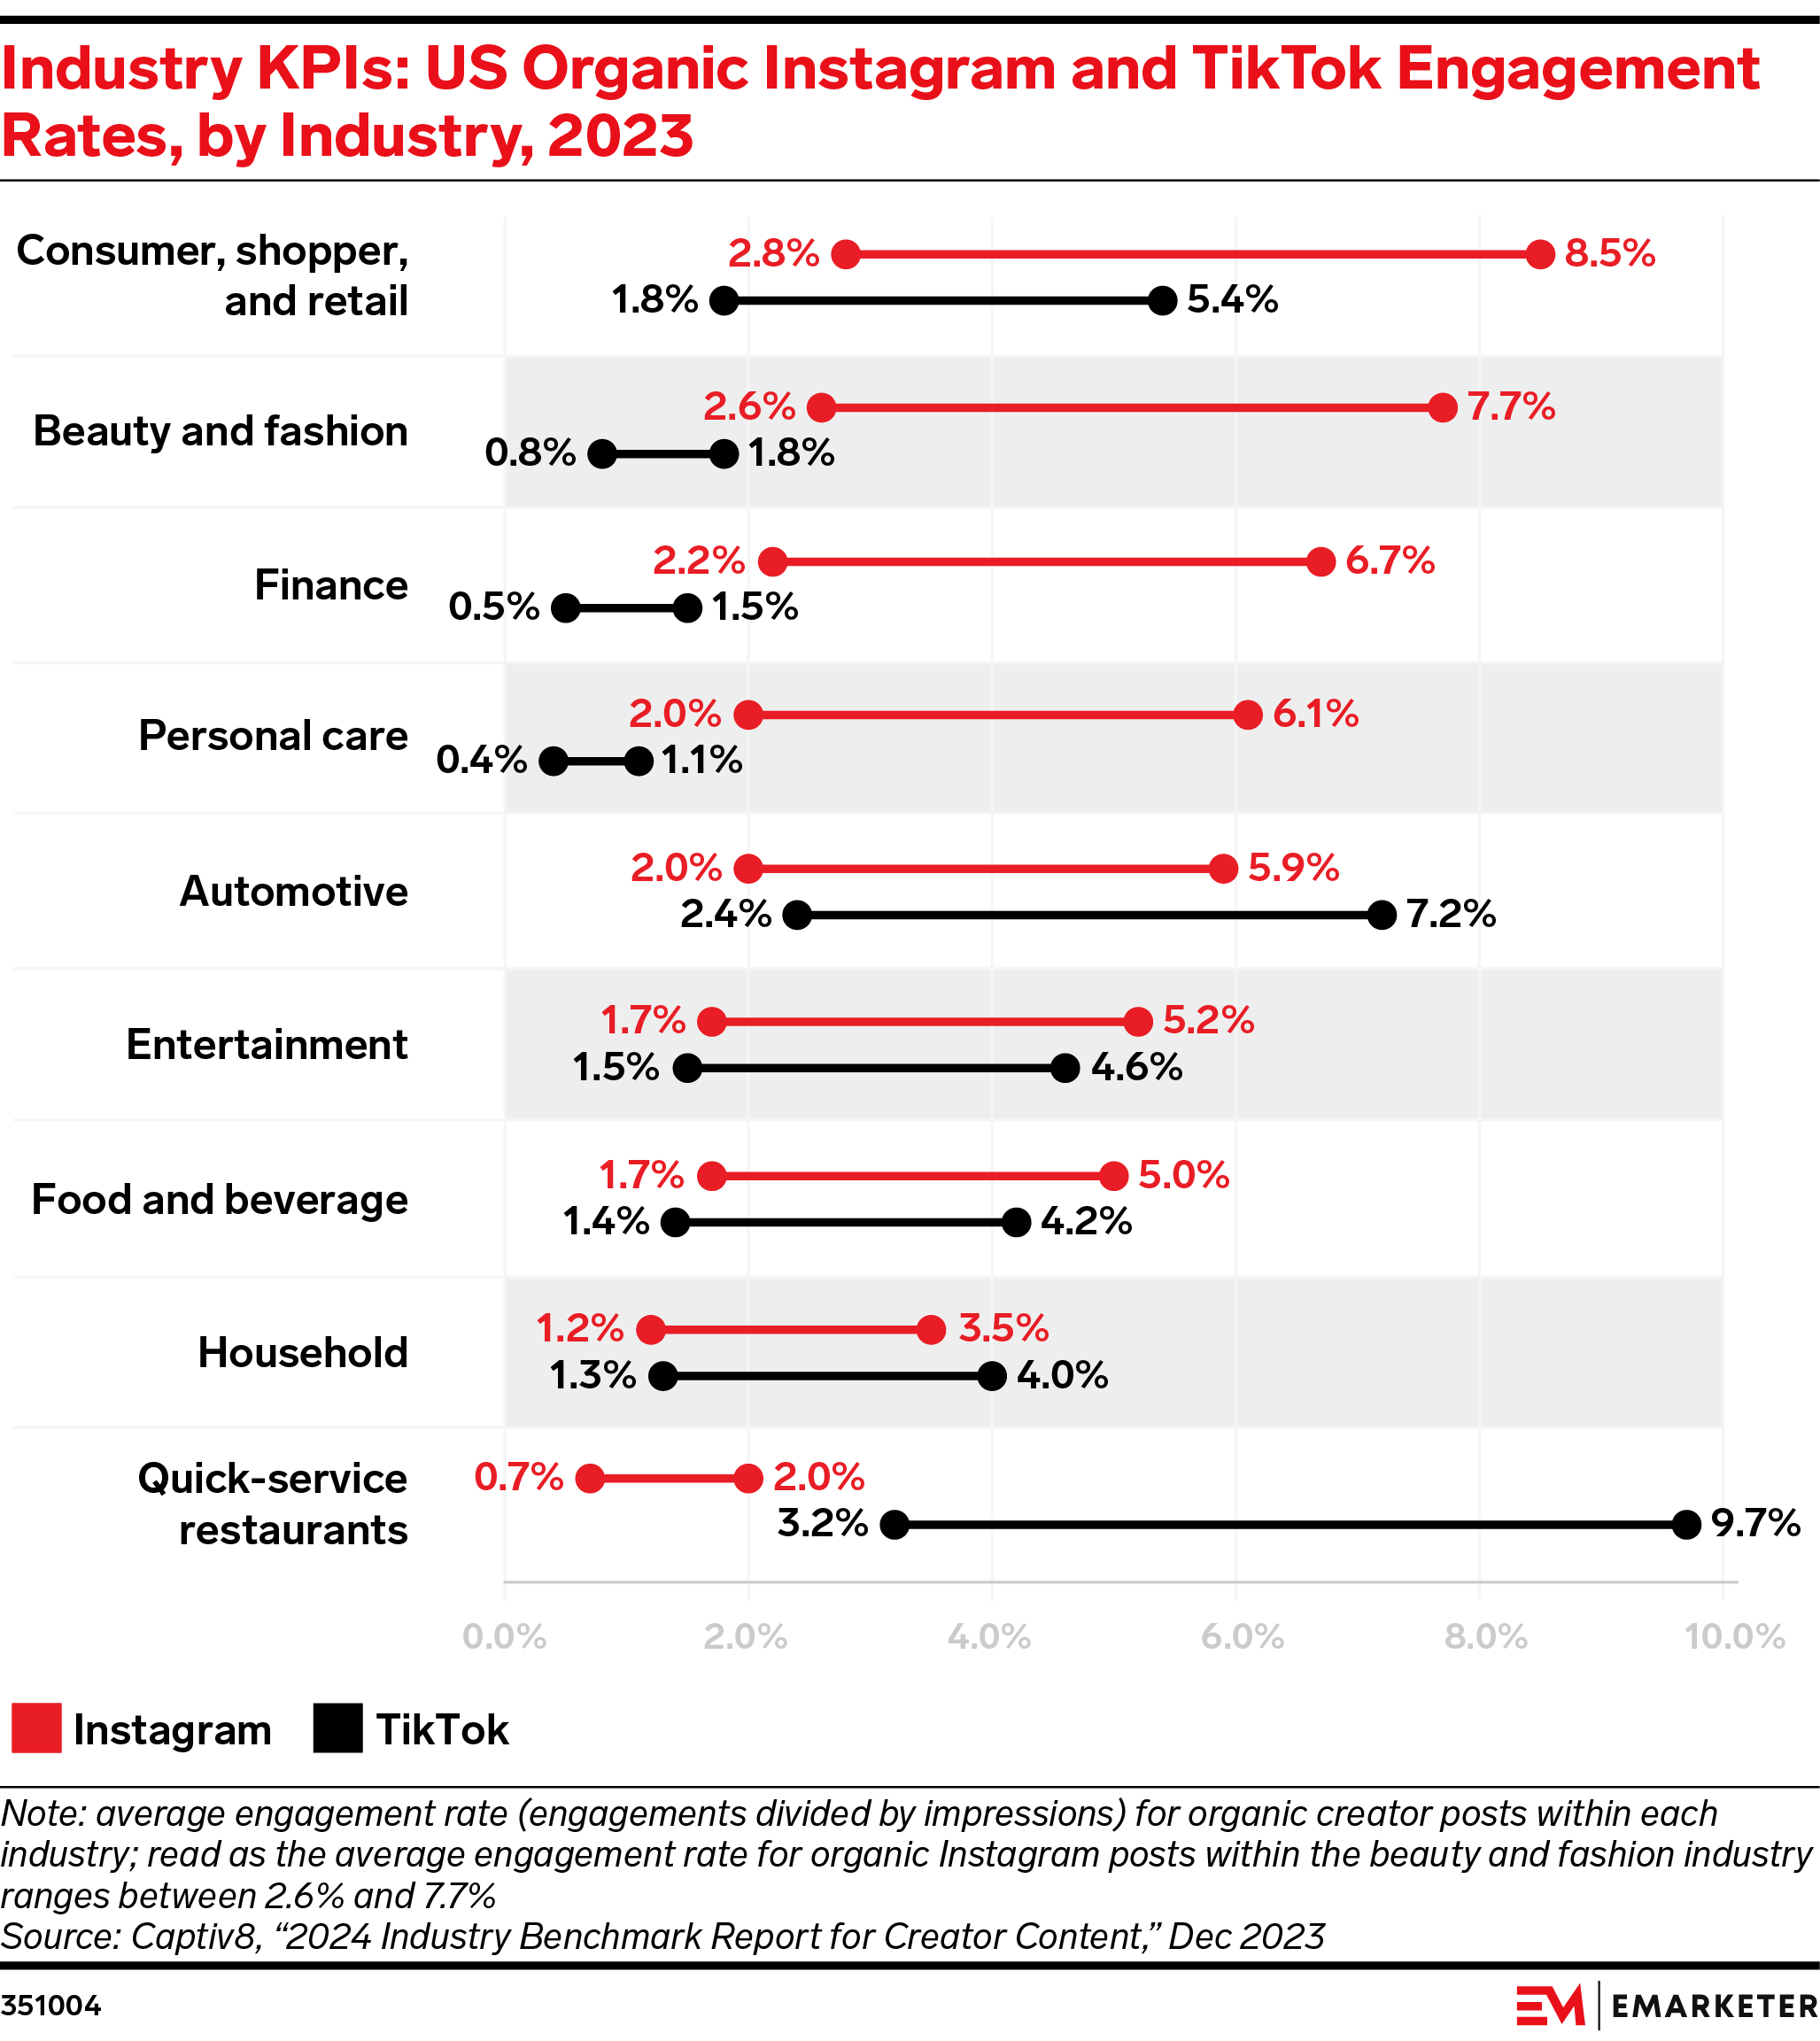 Industry KPIs: US Organic Instagram and TikTok Engagement Rates, by Industry, 2023